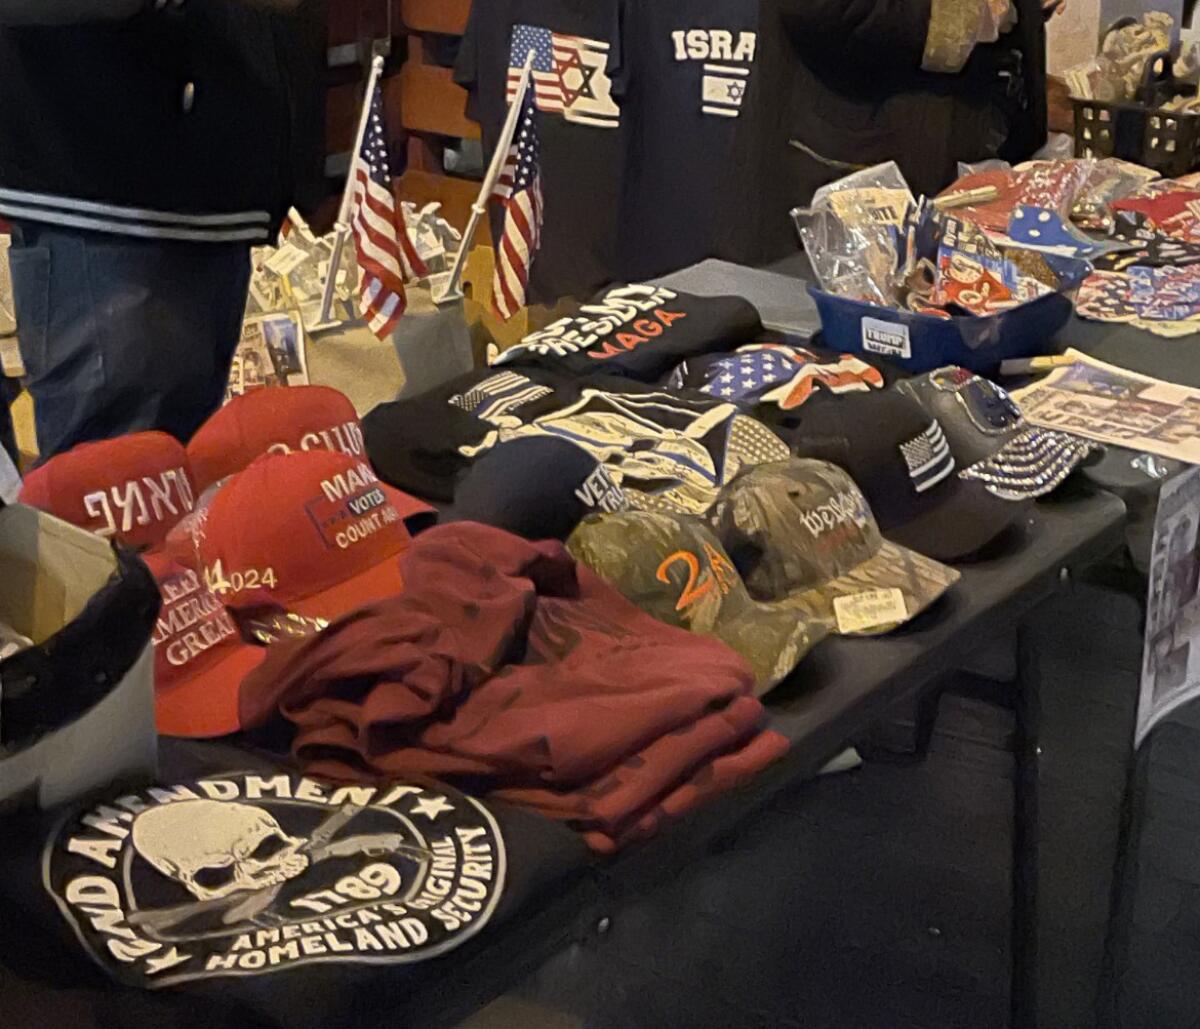 A vendor at Hospitality Night in Laguna Beach on Dec. 3 displayed right-wing political items.